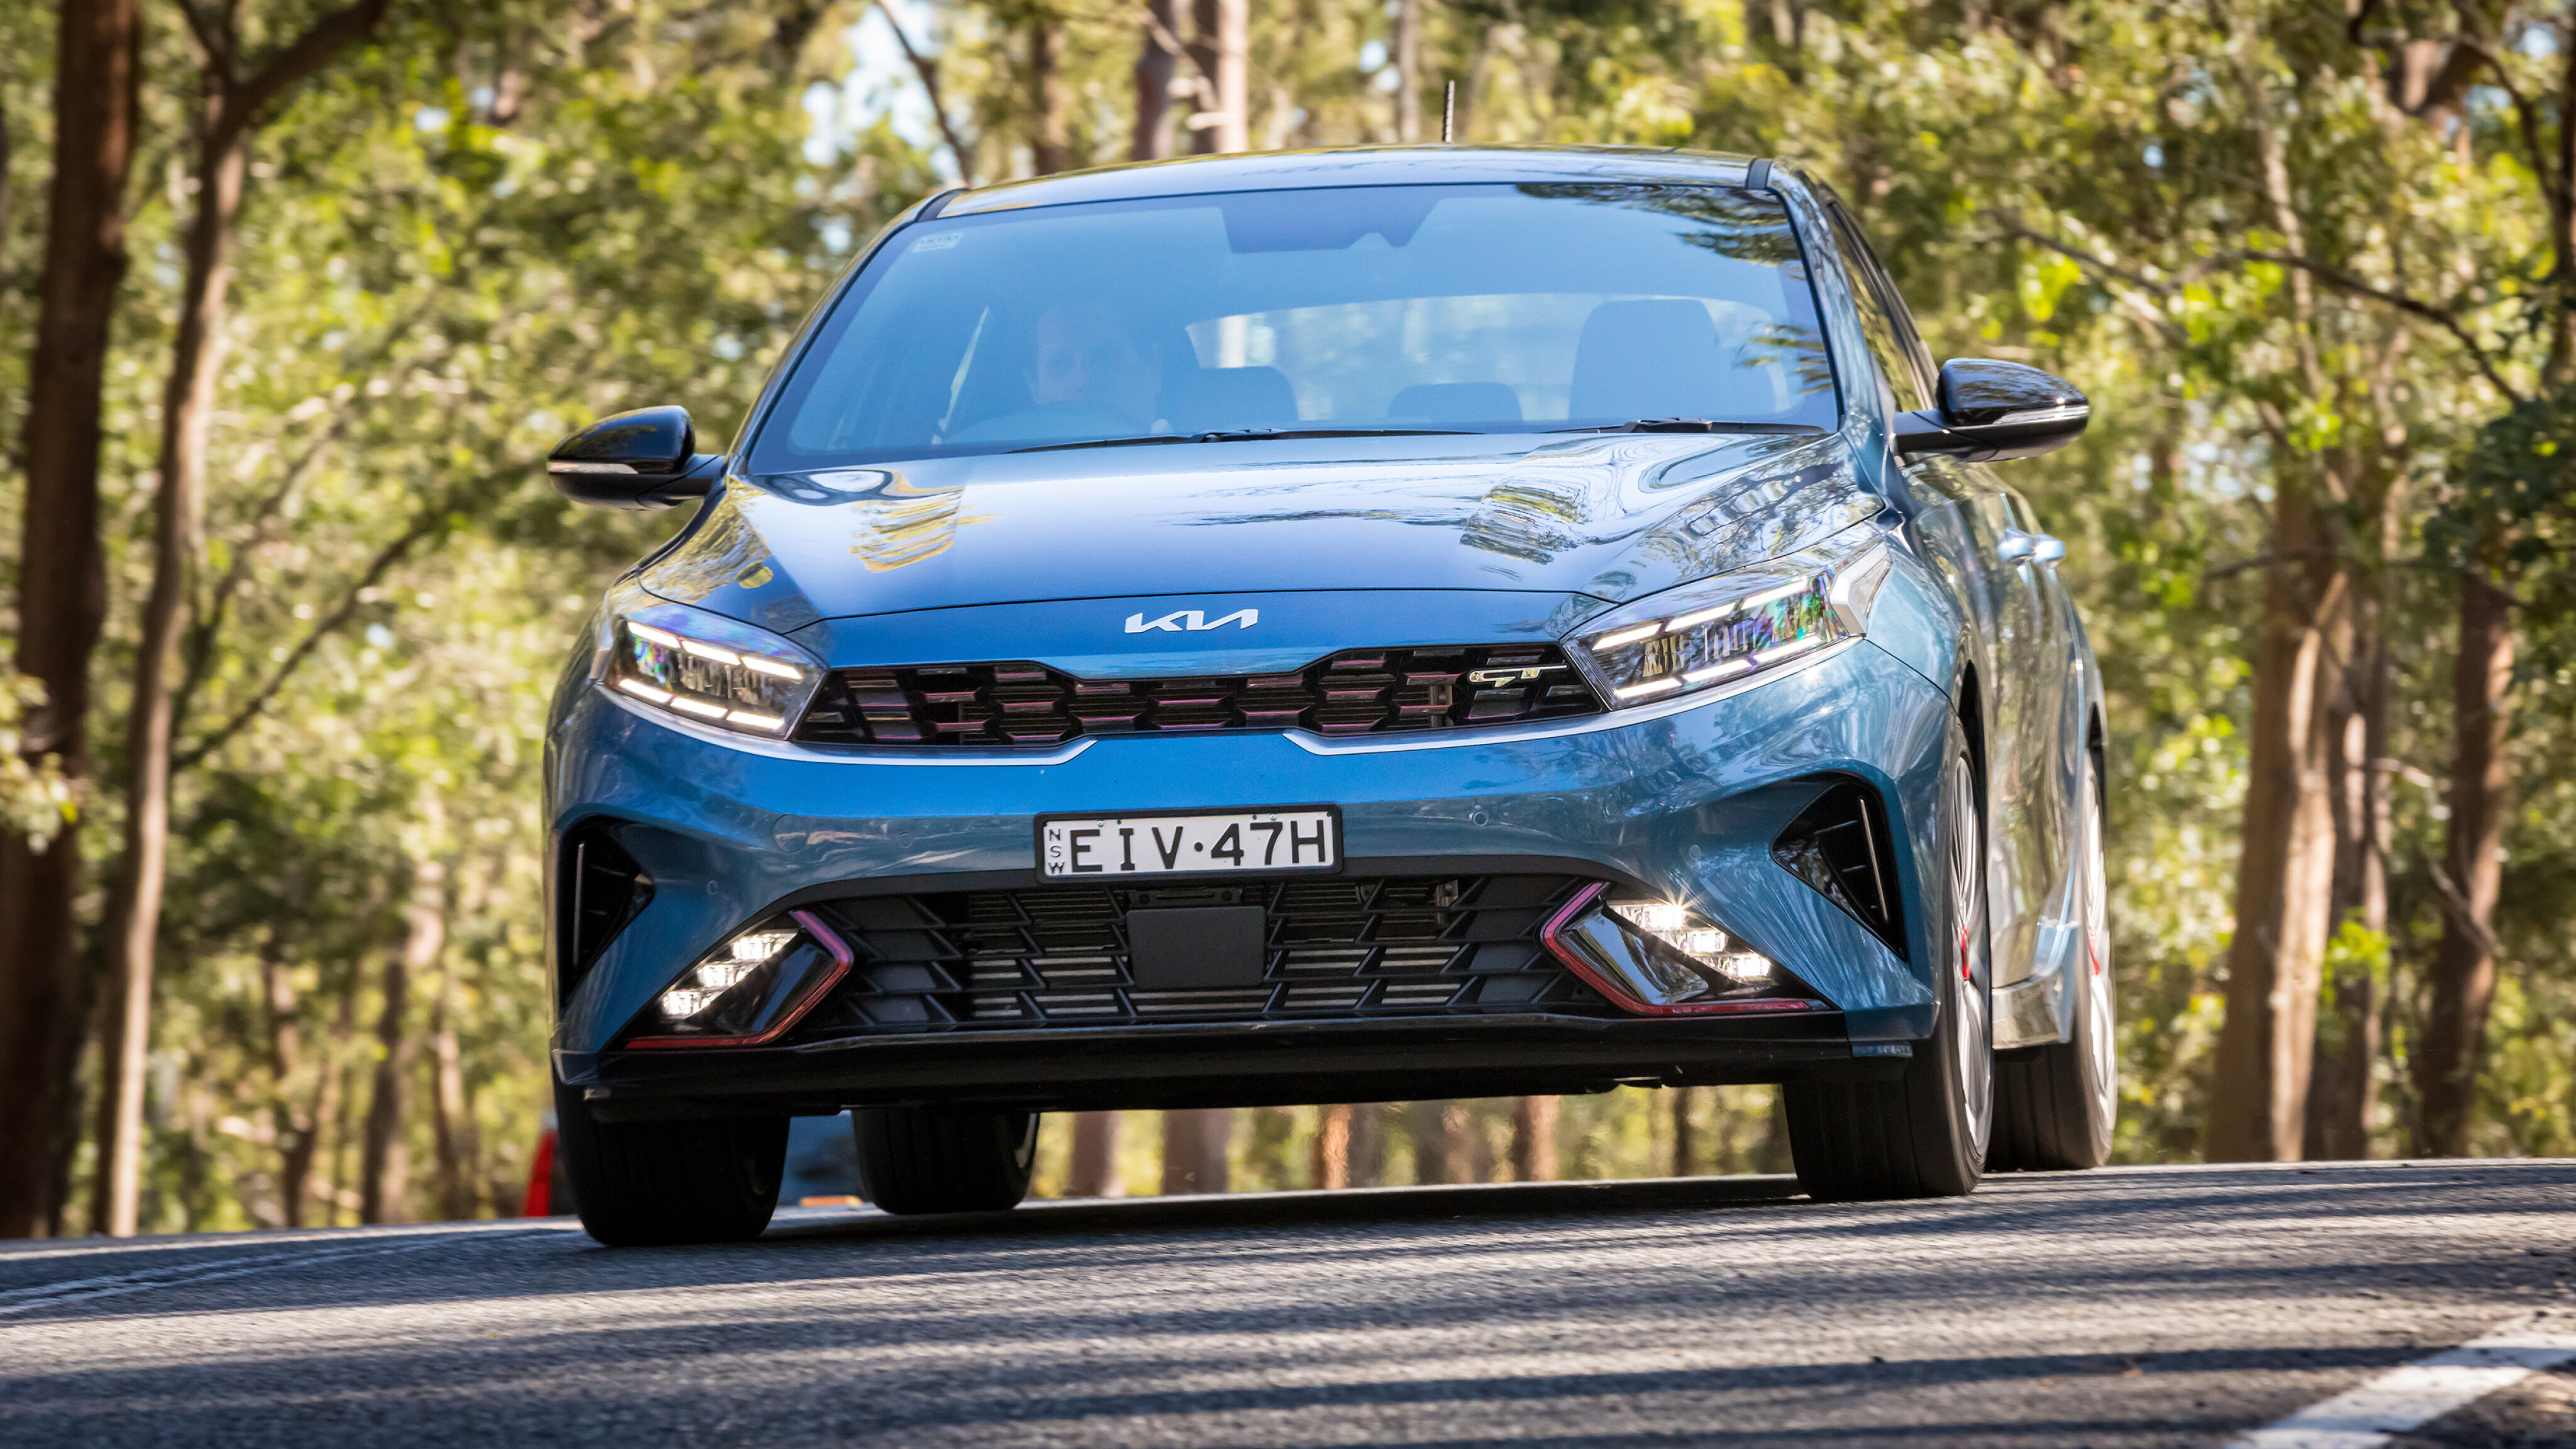 KIA ProCeed 2022 - First FULL Review in 4K  GT Line (Exterior - Interior)  Facelift, PRICE 